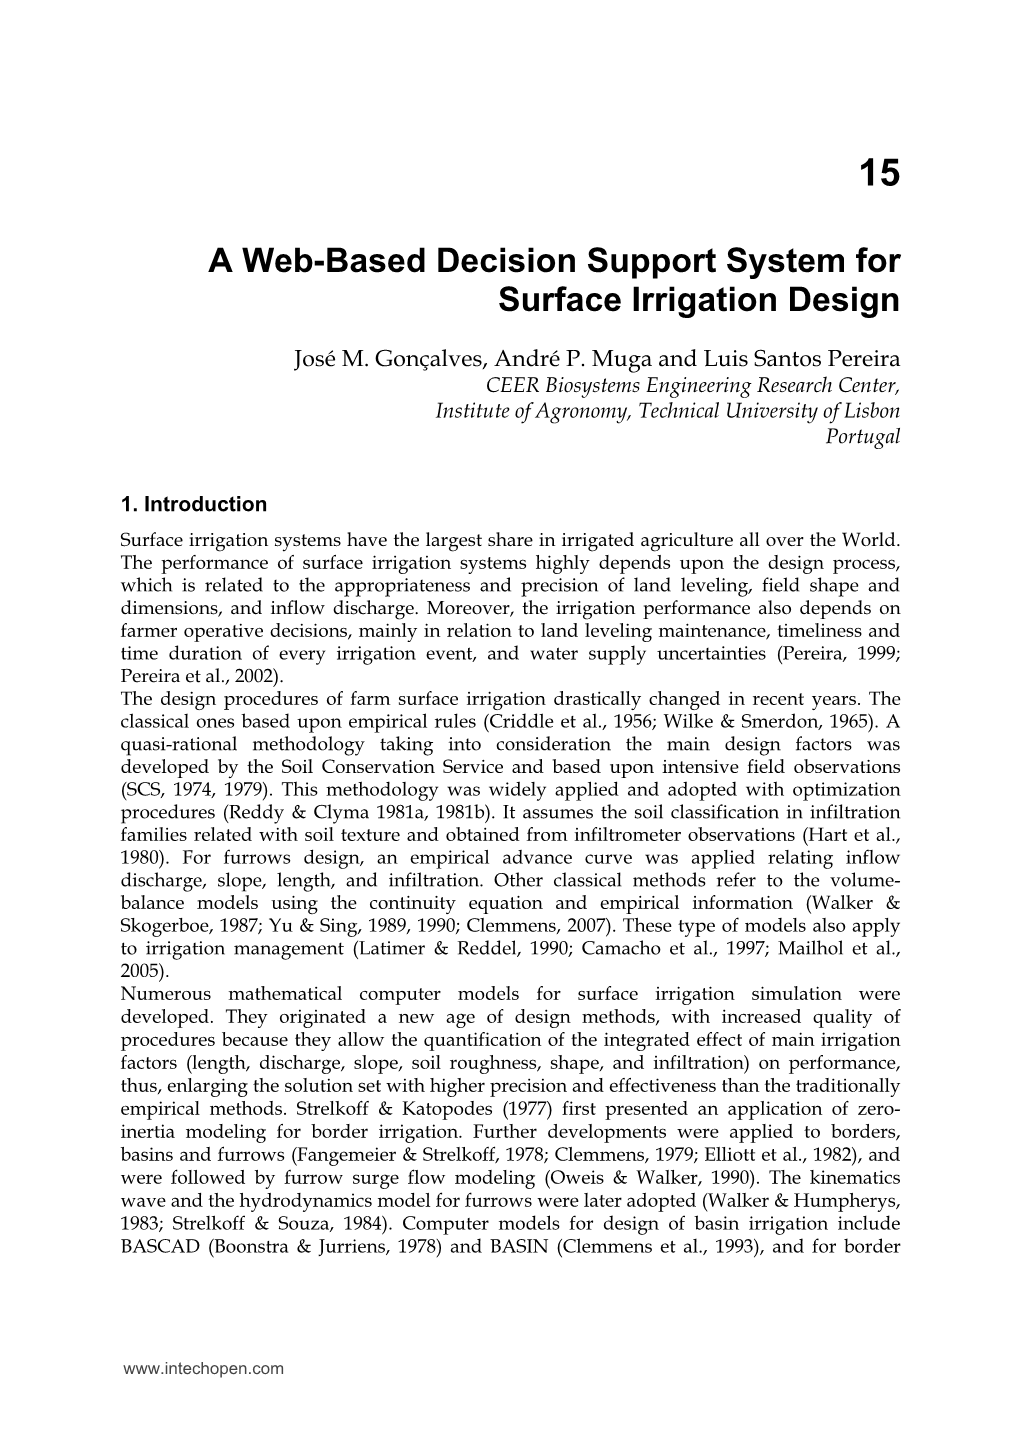 A Web-Based Decision Support System for Surface Irrigation Design